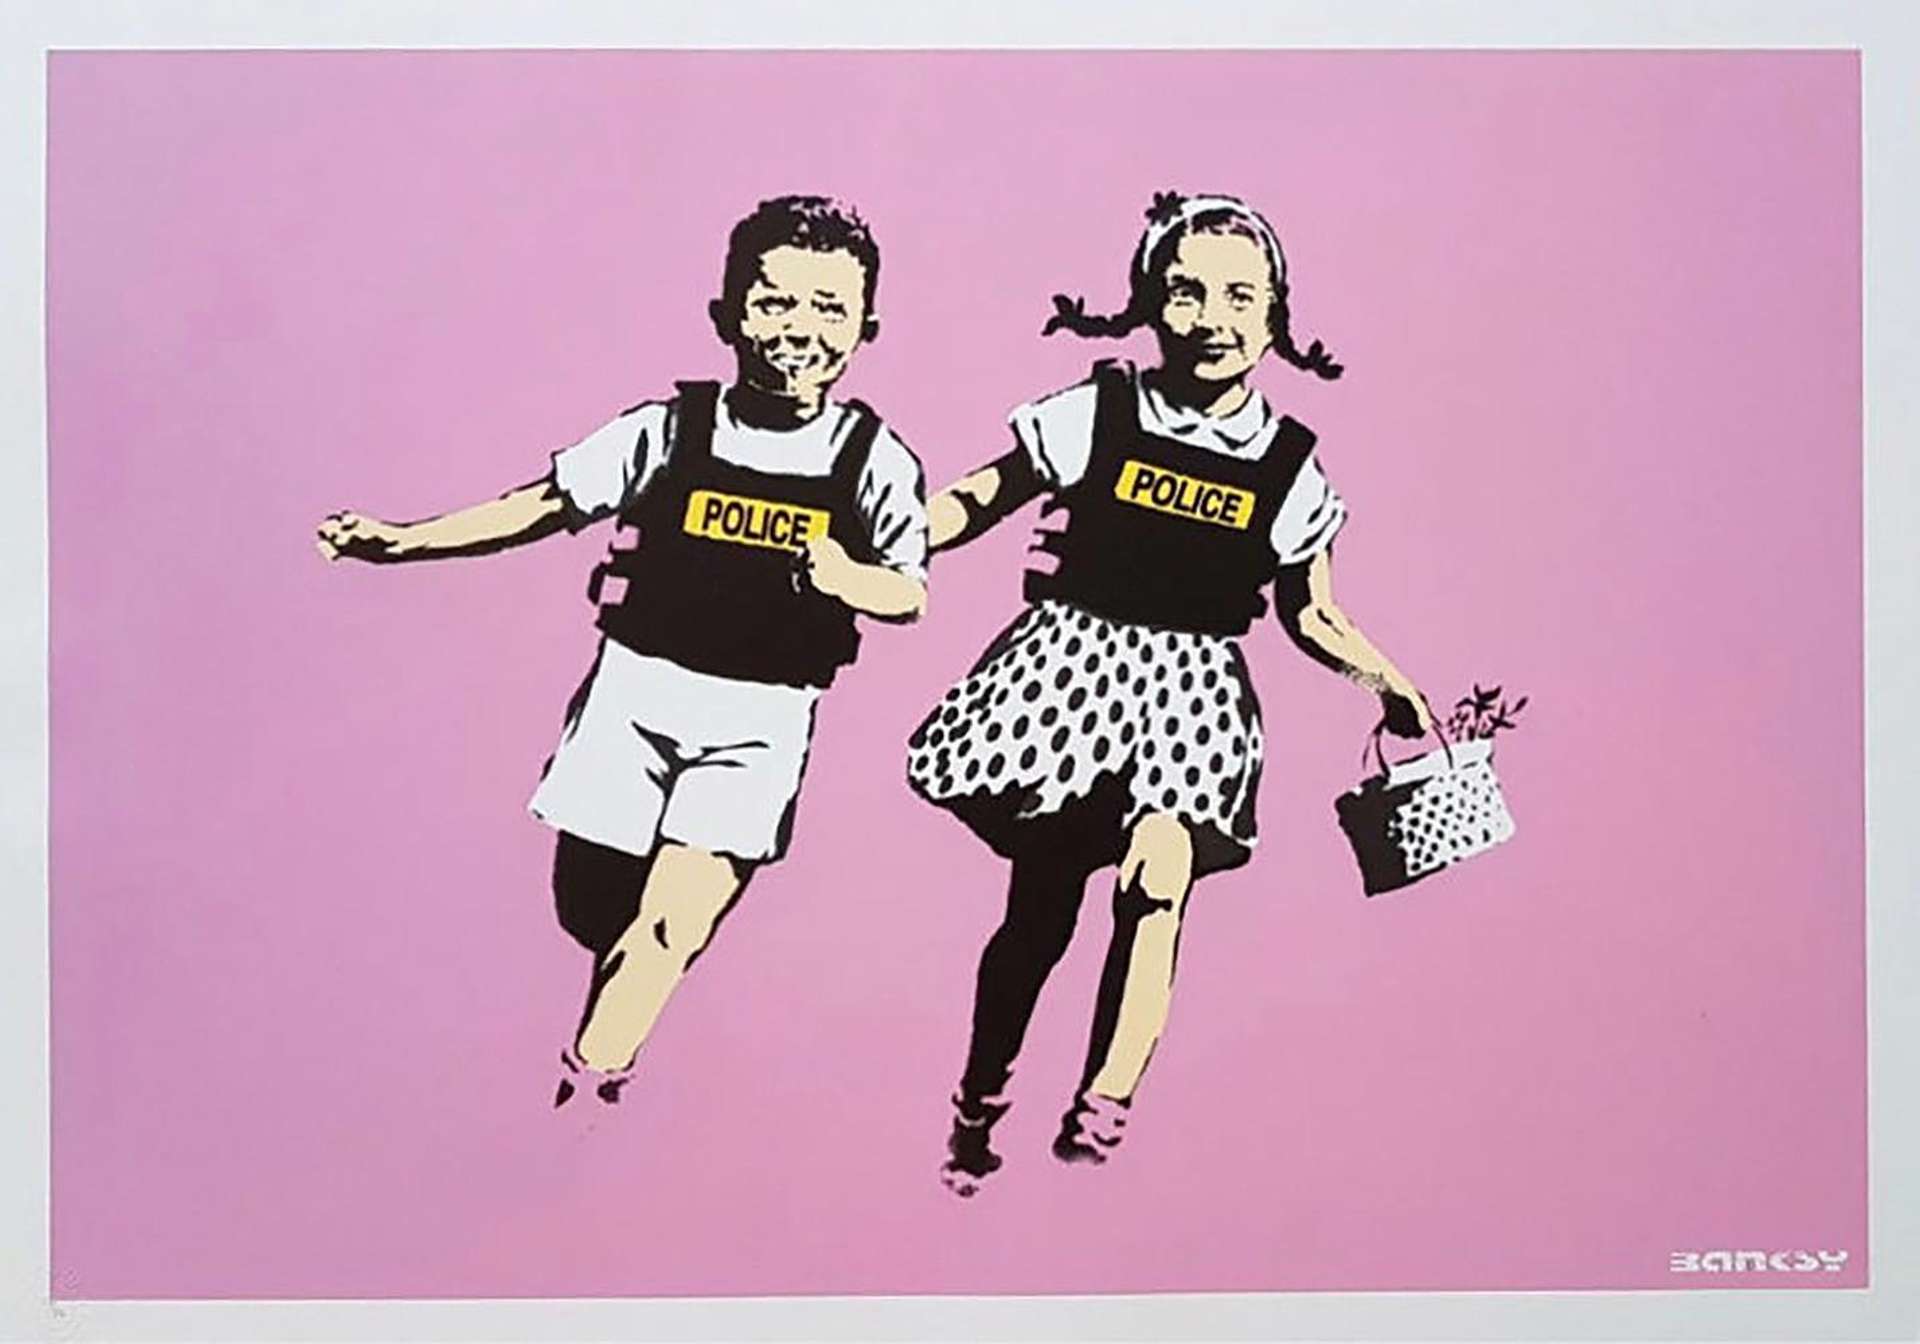 Jack and Jill by Banksy